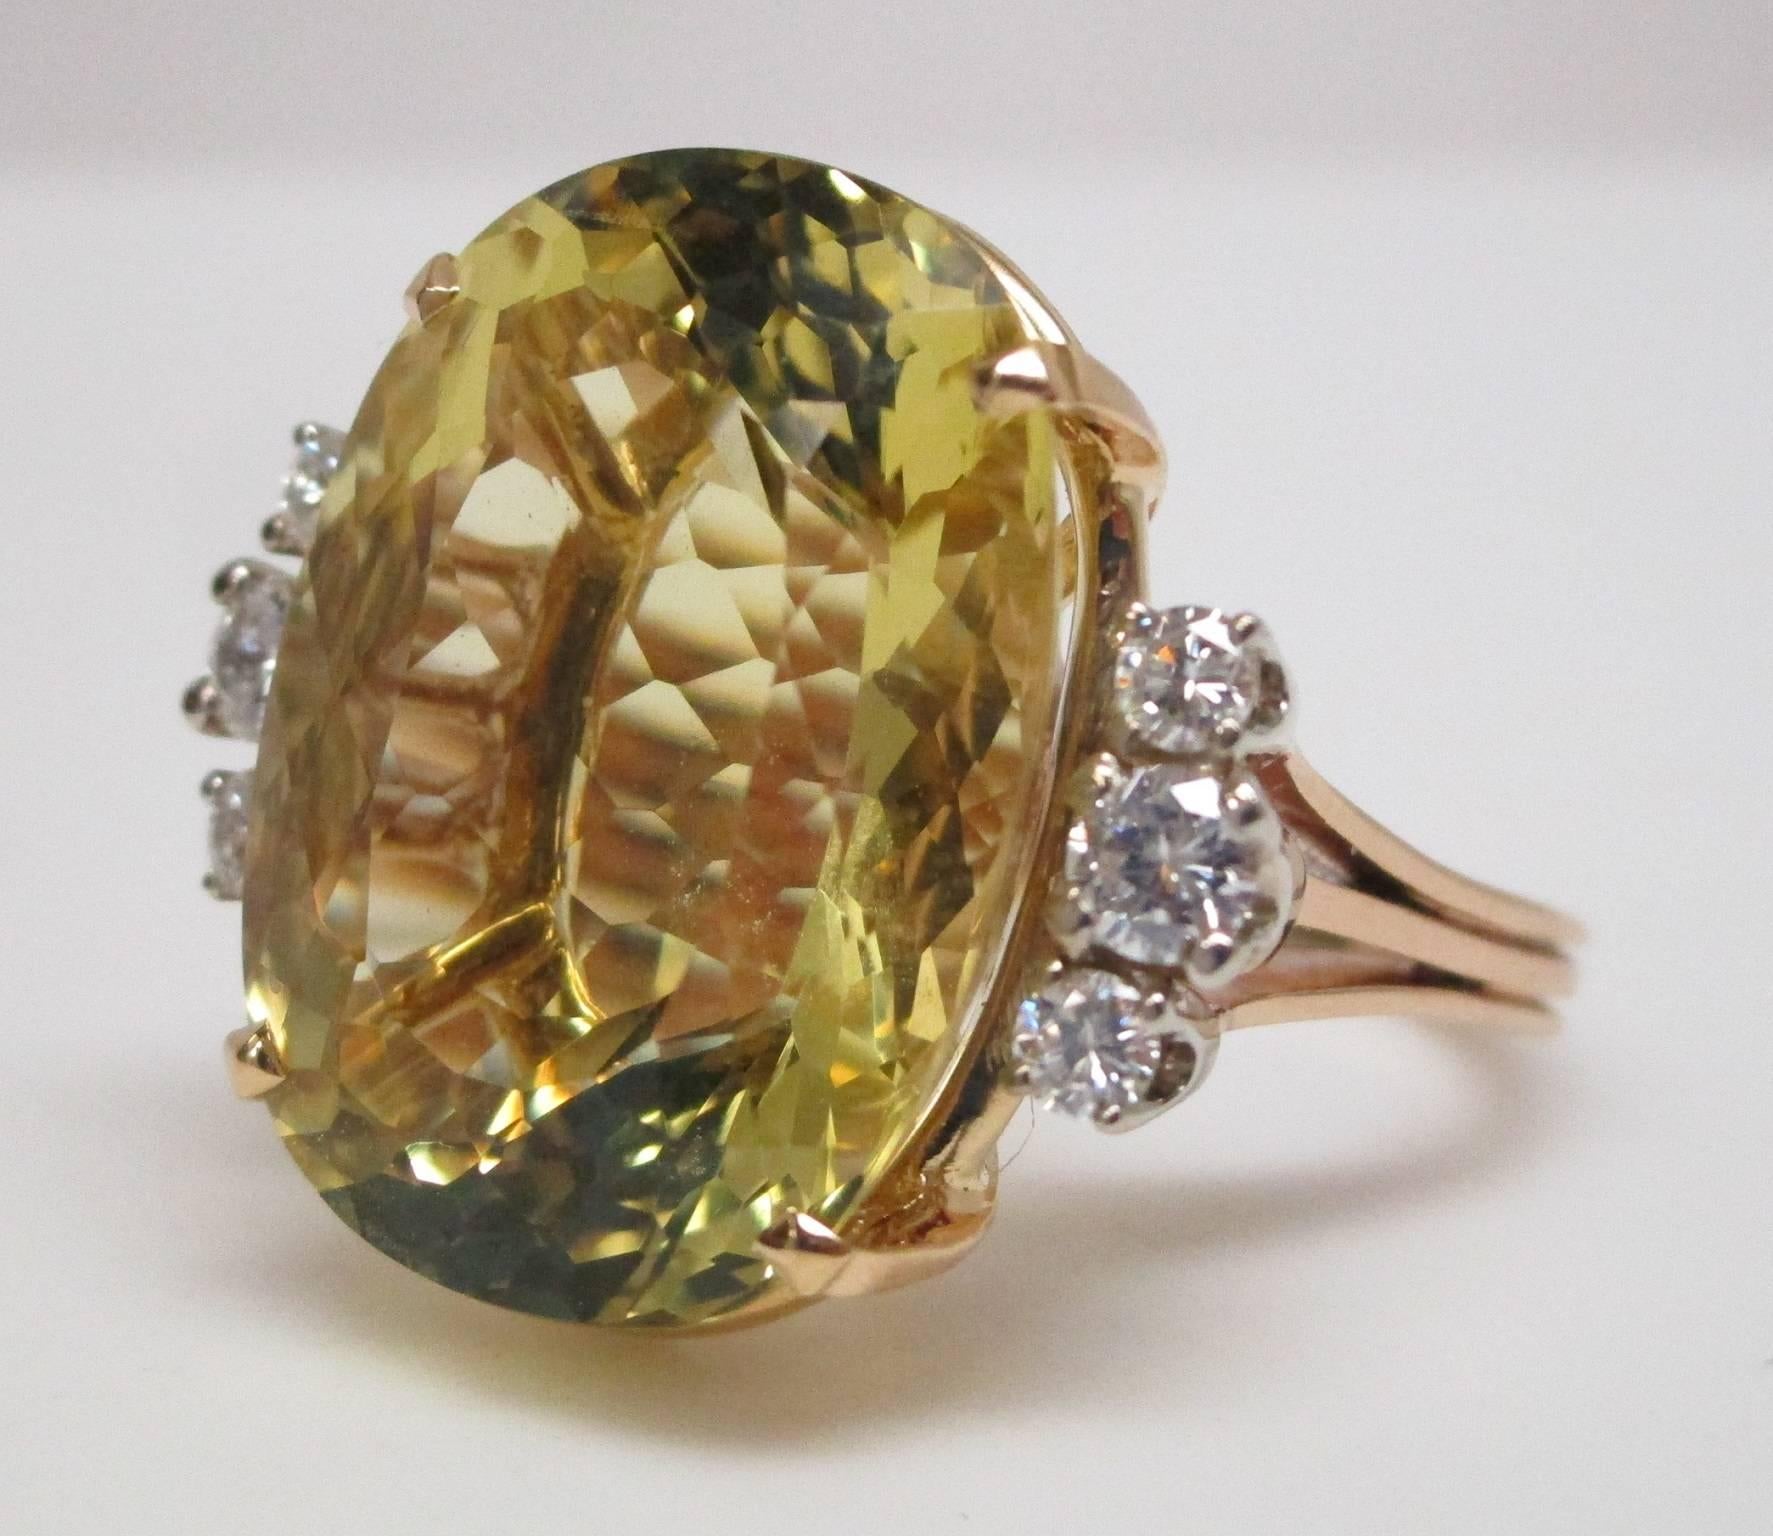 The golden beryl looks like a drop of sunshine captured between competing rows of moonlight, the diamonds. It has impressive size, being 16.38 carats, with 0.36 carats total in diamonds. The setting is 18K yellow gold. People will not miss seeing